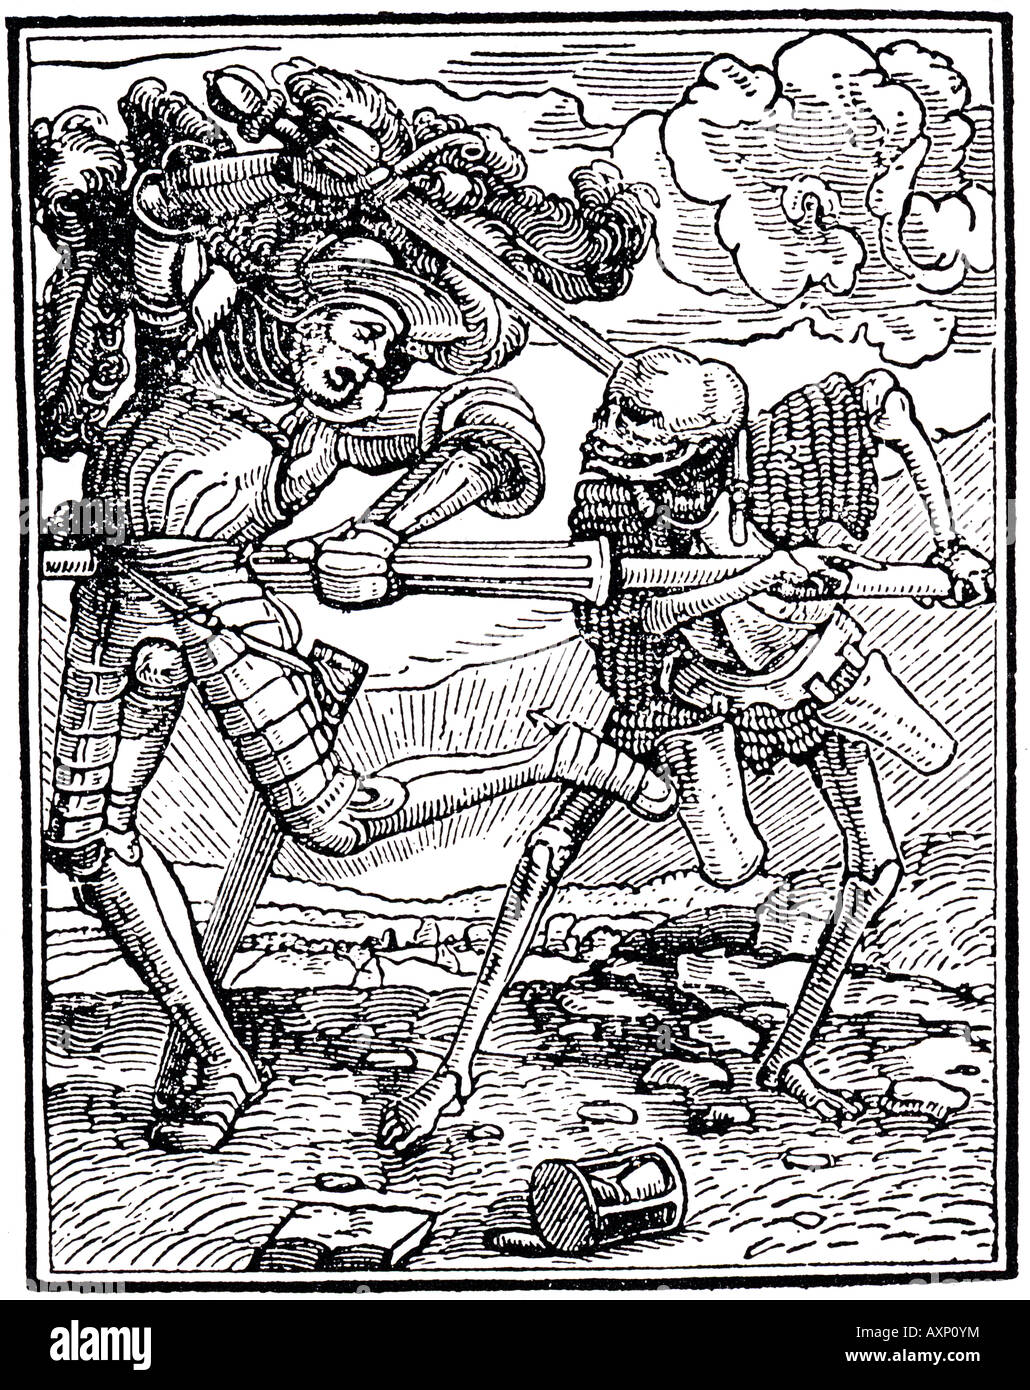 HANS HOLBEIN Dance of Death a print from the engraved series of 1526 shows Death killing a Soldier Stock Photo